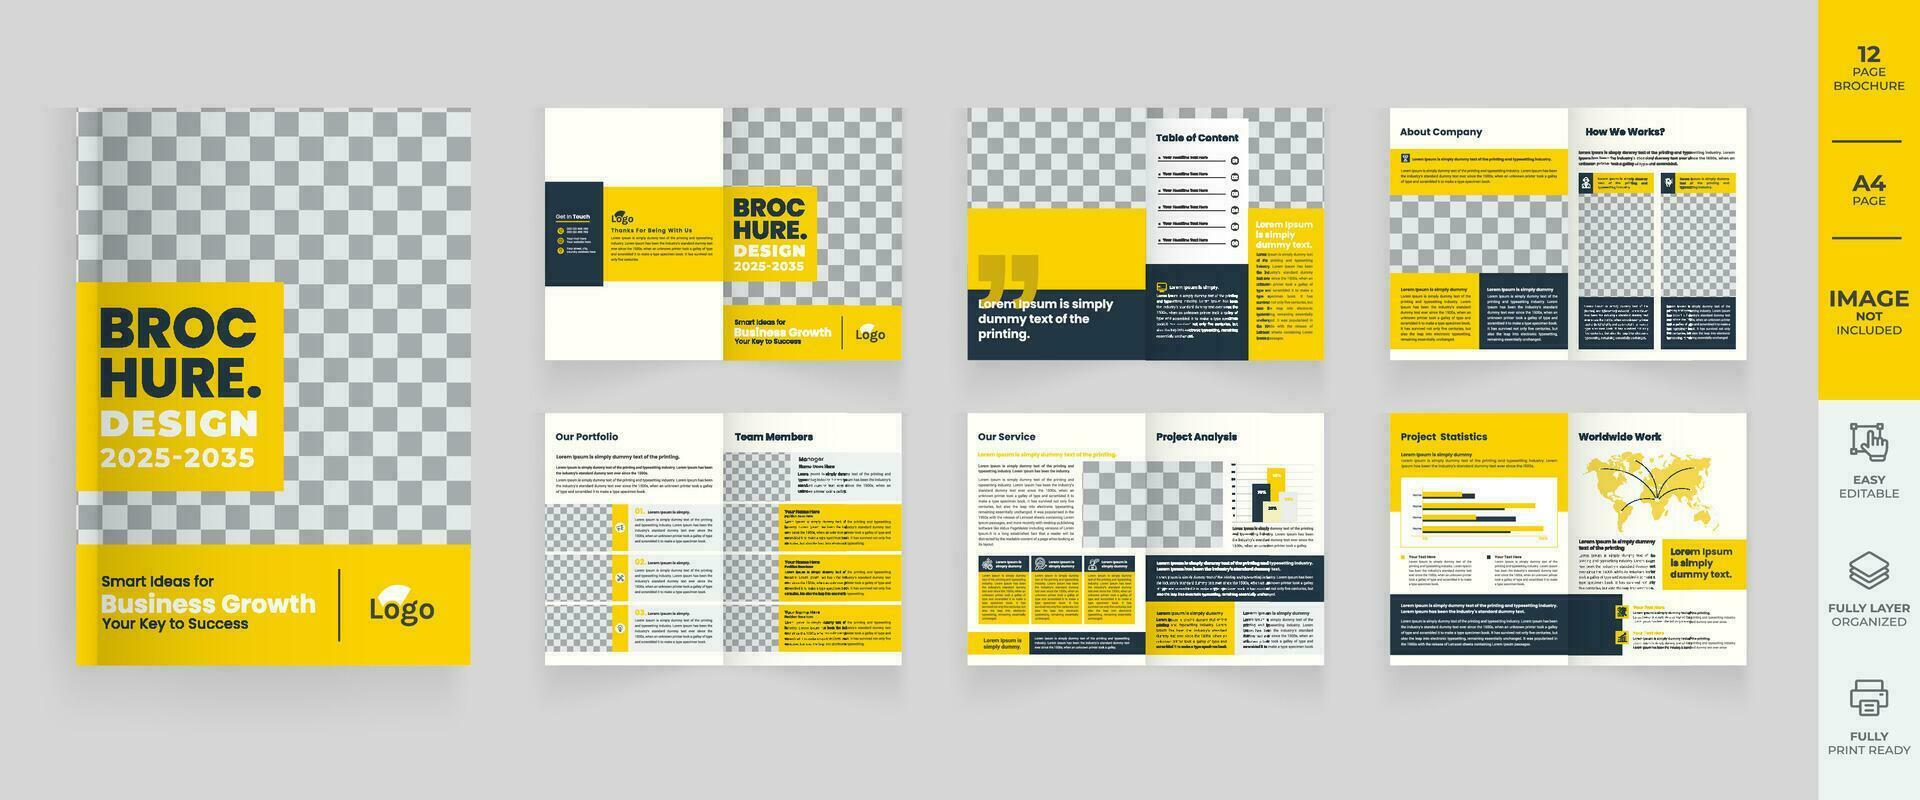 Company profile brochure template, business proposal layout concept design, yellow minimal company profile template layout vector